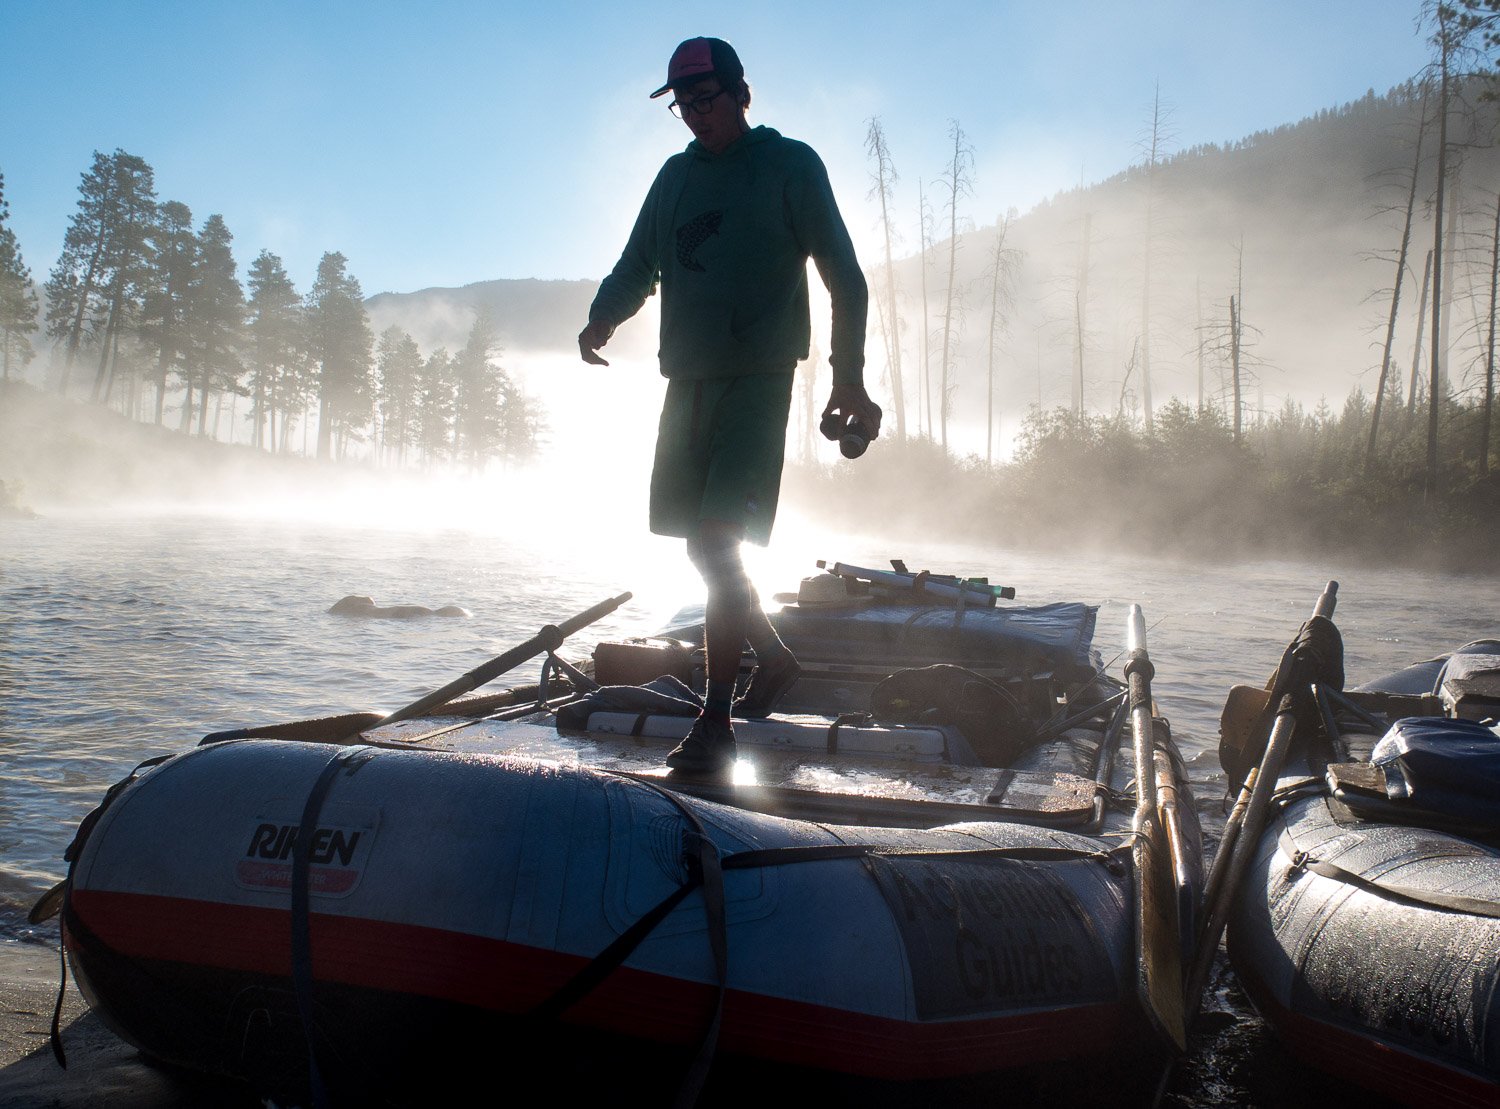 parker thornton steps off a boat in the early morning light.jpg